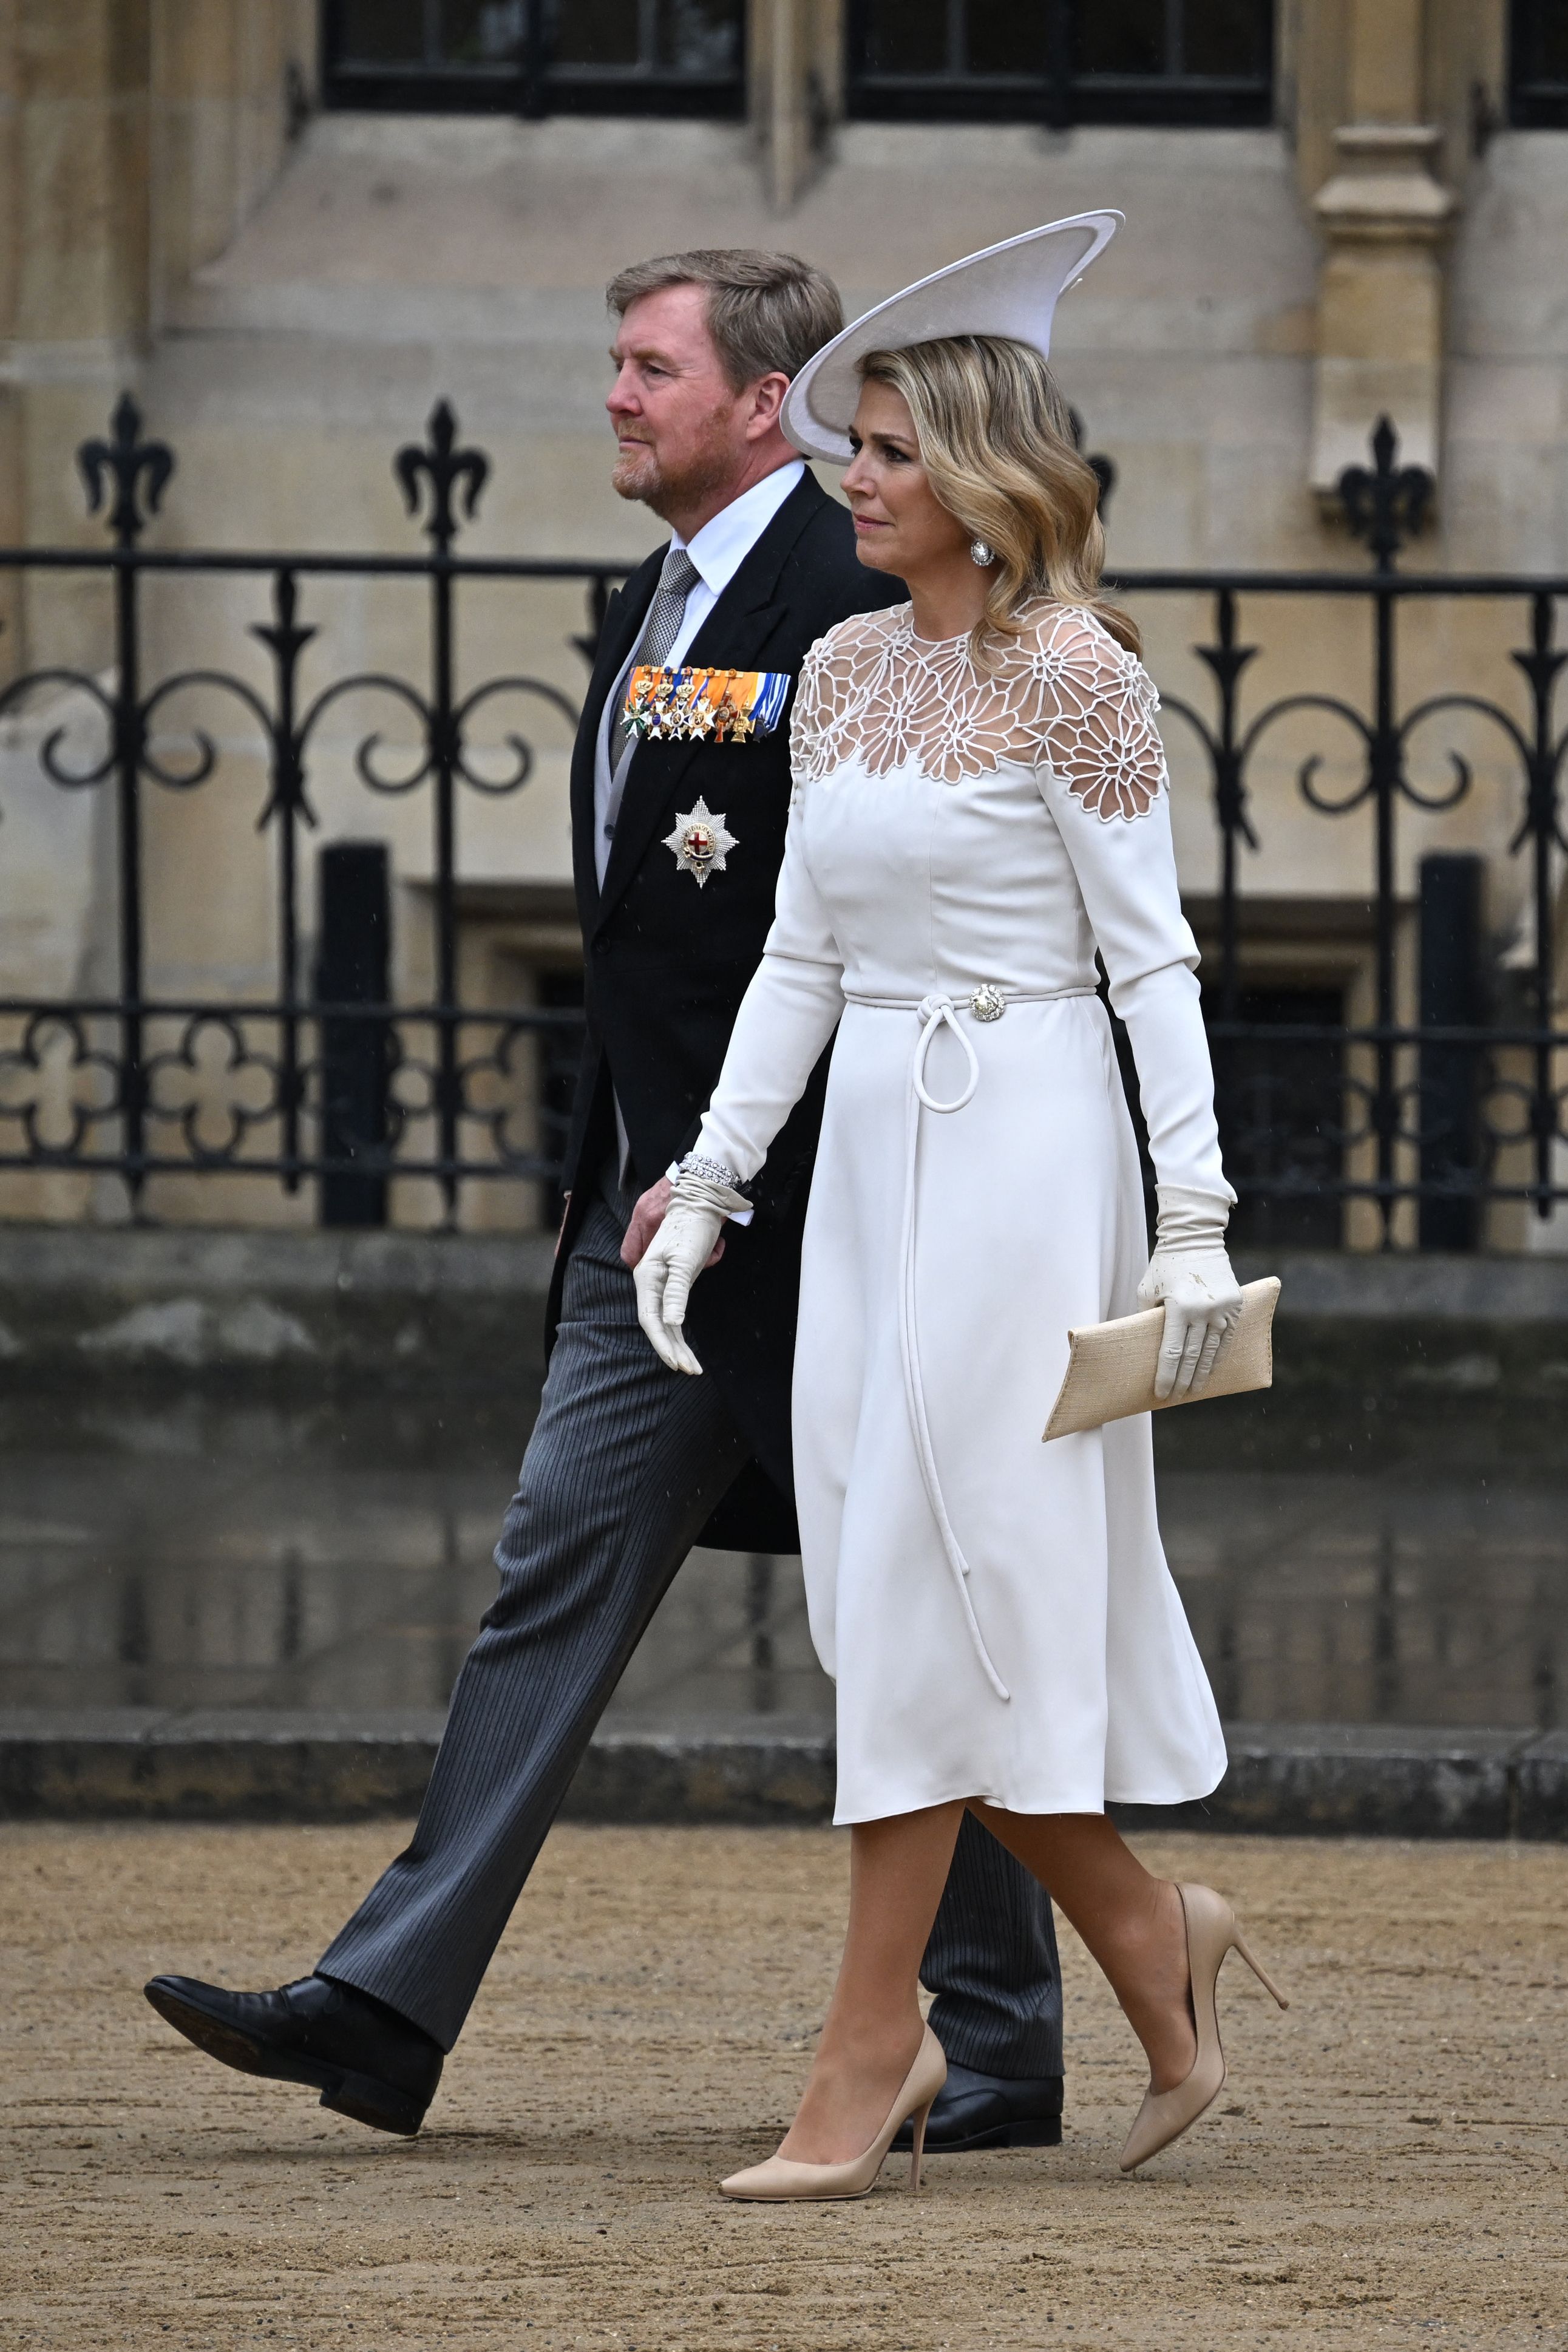 Queen Maxima of the Netherlands and King Willem-Alexander came to attend the coronation